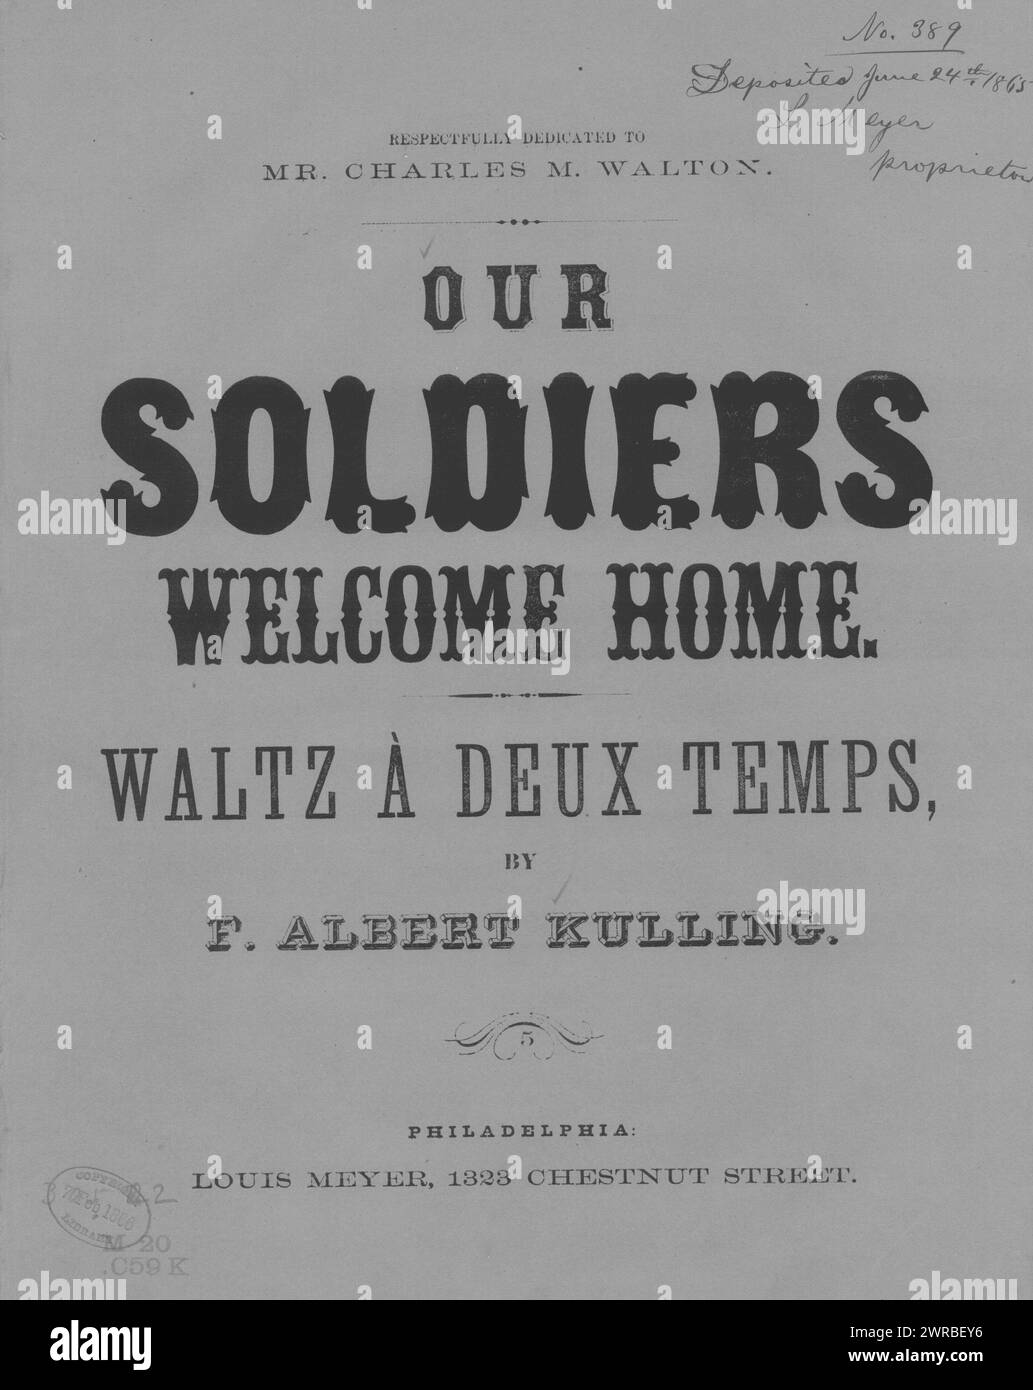 Our soldiers welcome home waltz, Kulling, F. Albert (composer), Louis Meyer, Philadelphia, 1865., United States, History, Civil War, 1861-1865, Songs and music Stock Photo